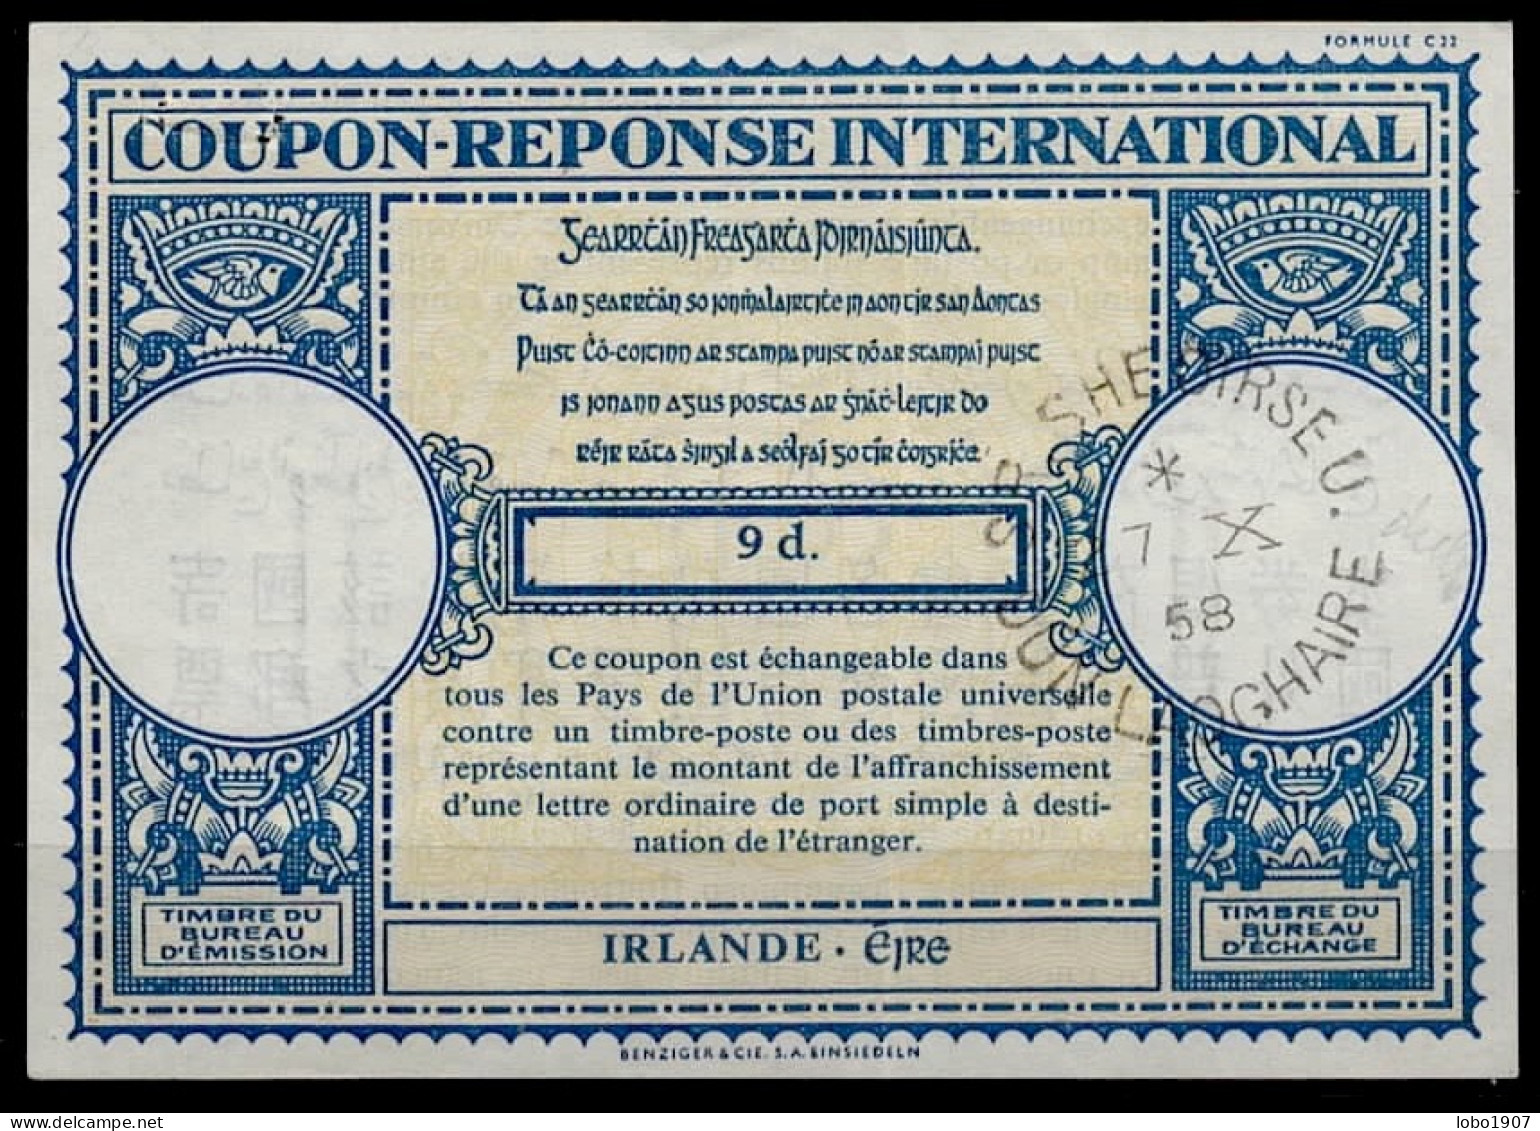 IRLANDE IRELAND ÉIRE  Lo16n 9d.  International Reply Coupon Reponse Antwortschein IRC IAS O DUN SHE OIRSEU DUN LAOGHAIRE - Entiers Postaux